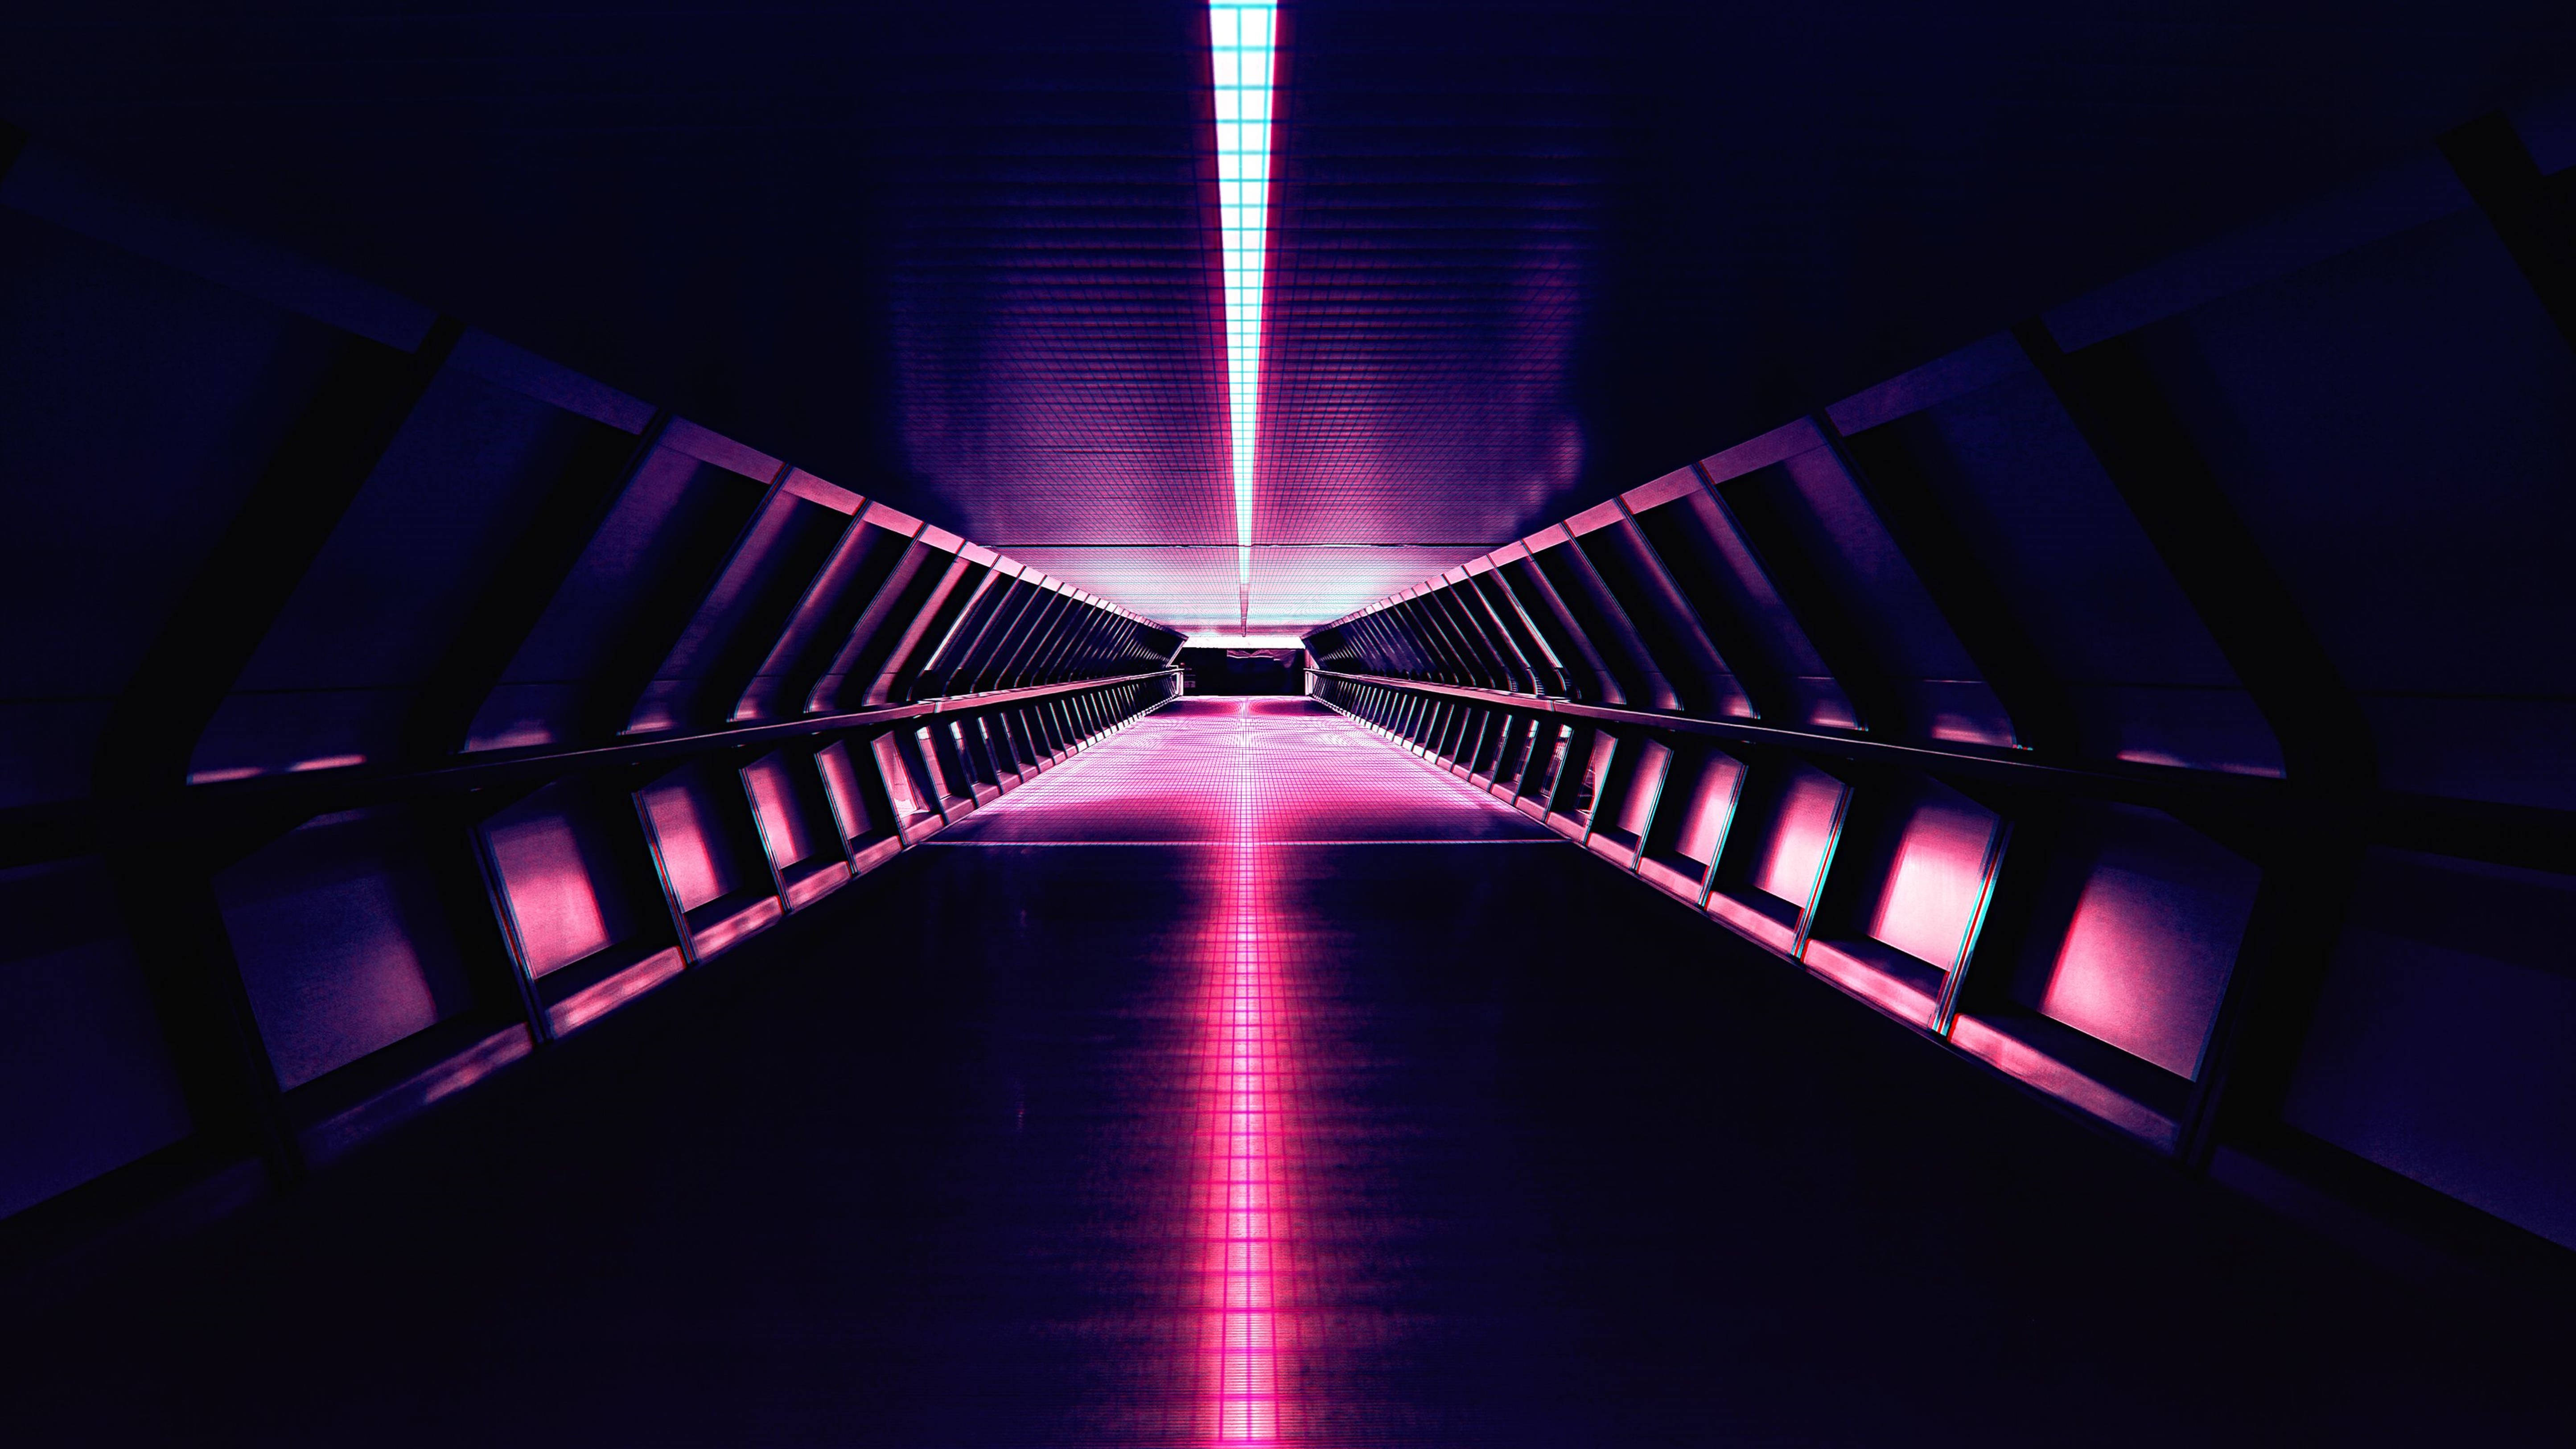 Free Retrowave Wallpaper Downloads, [200+] Retrowave Wallpapers for FREE |  